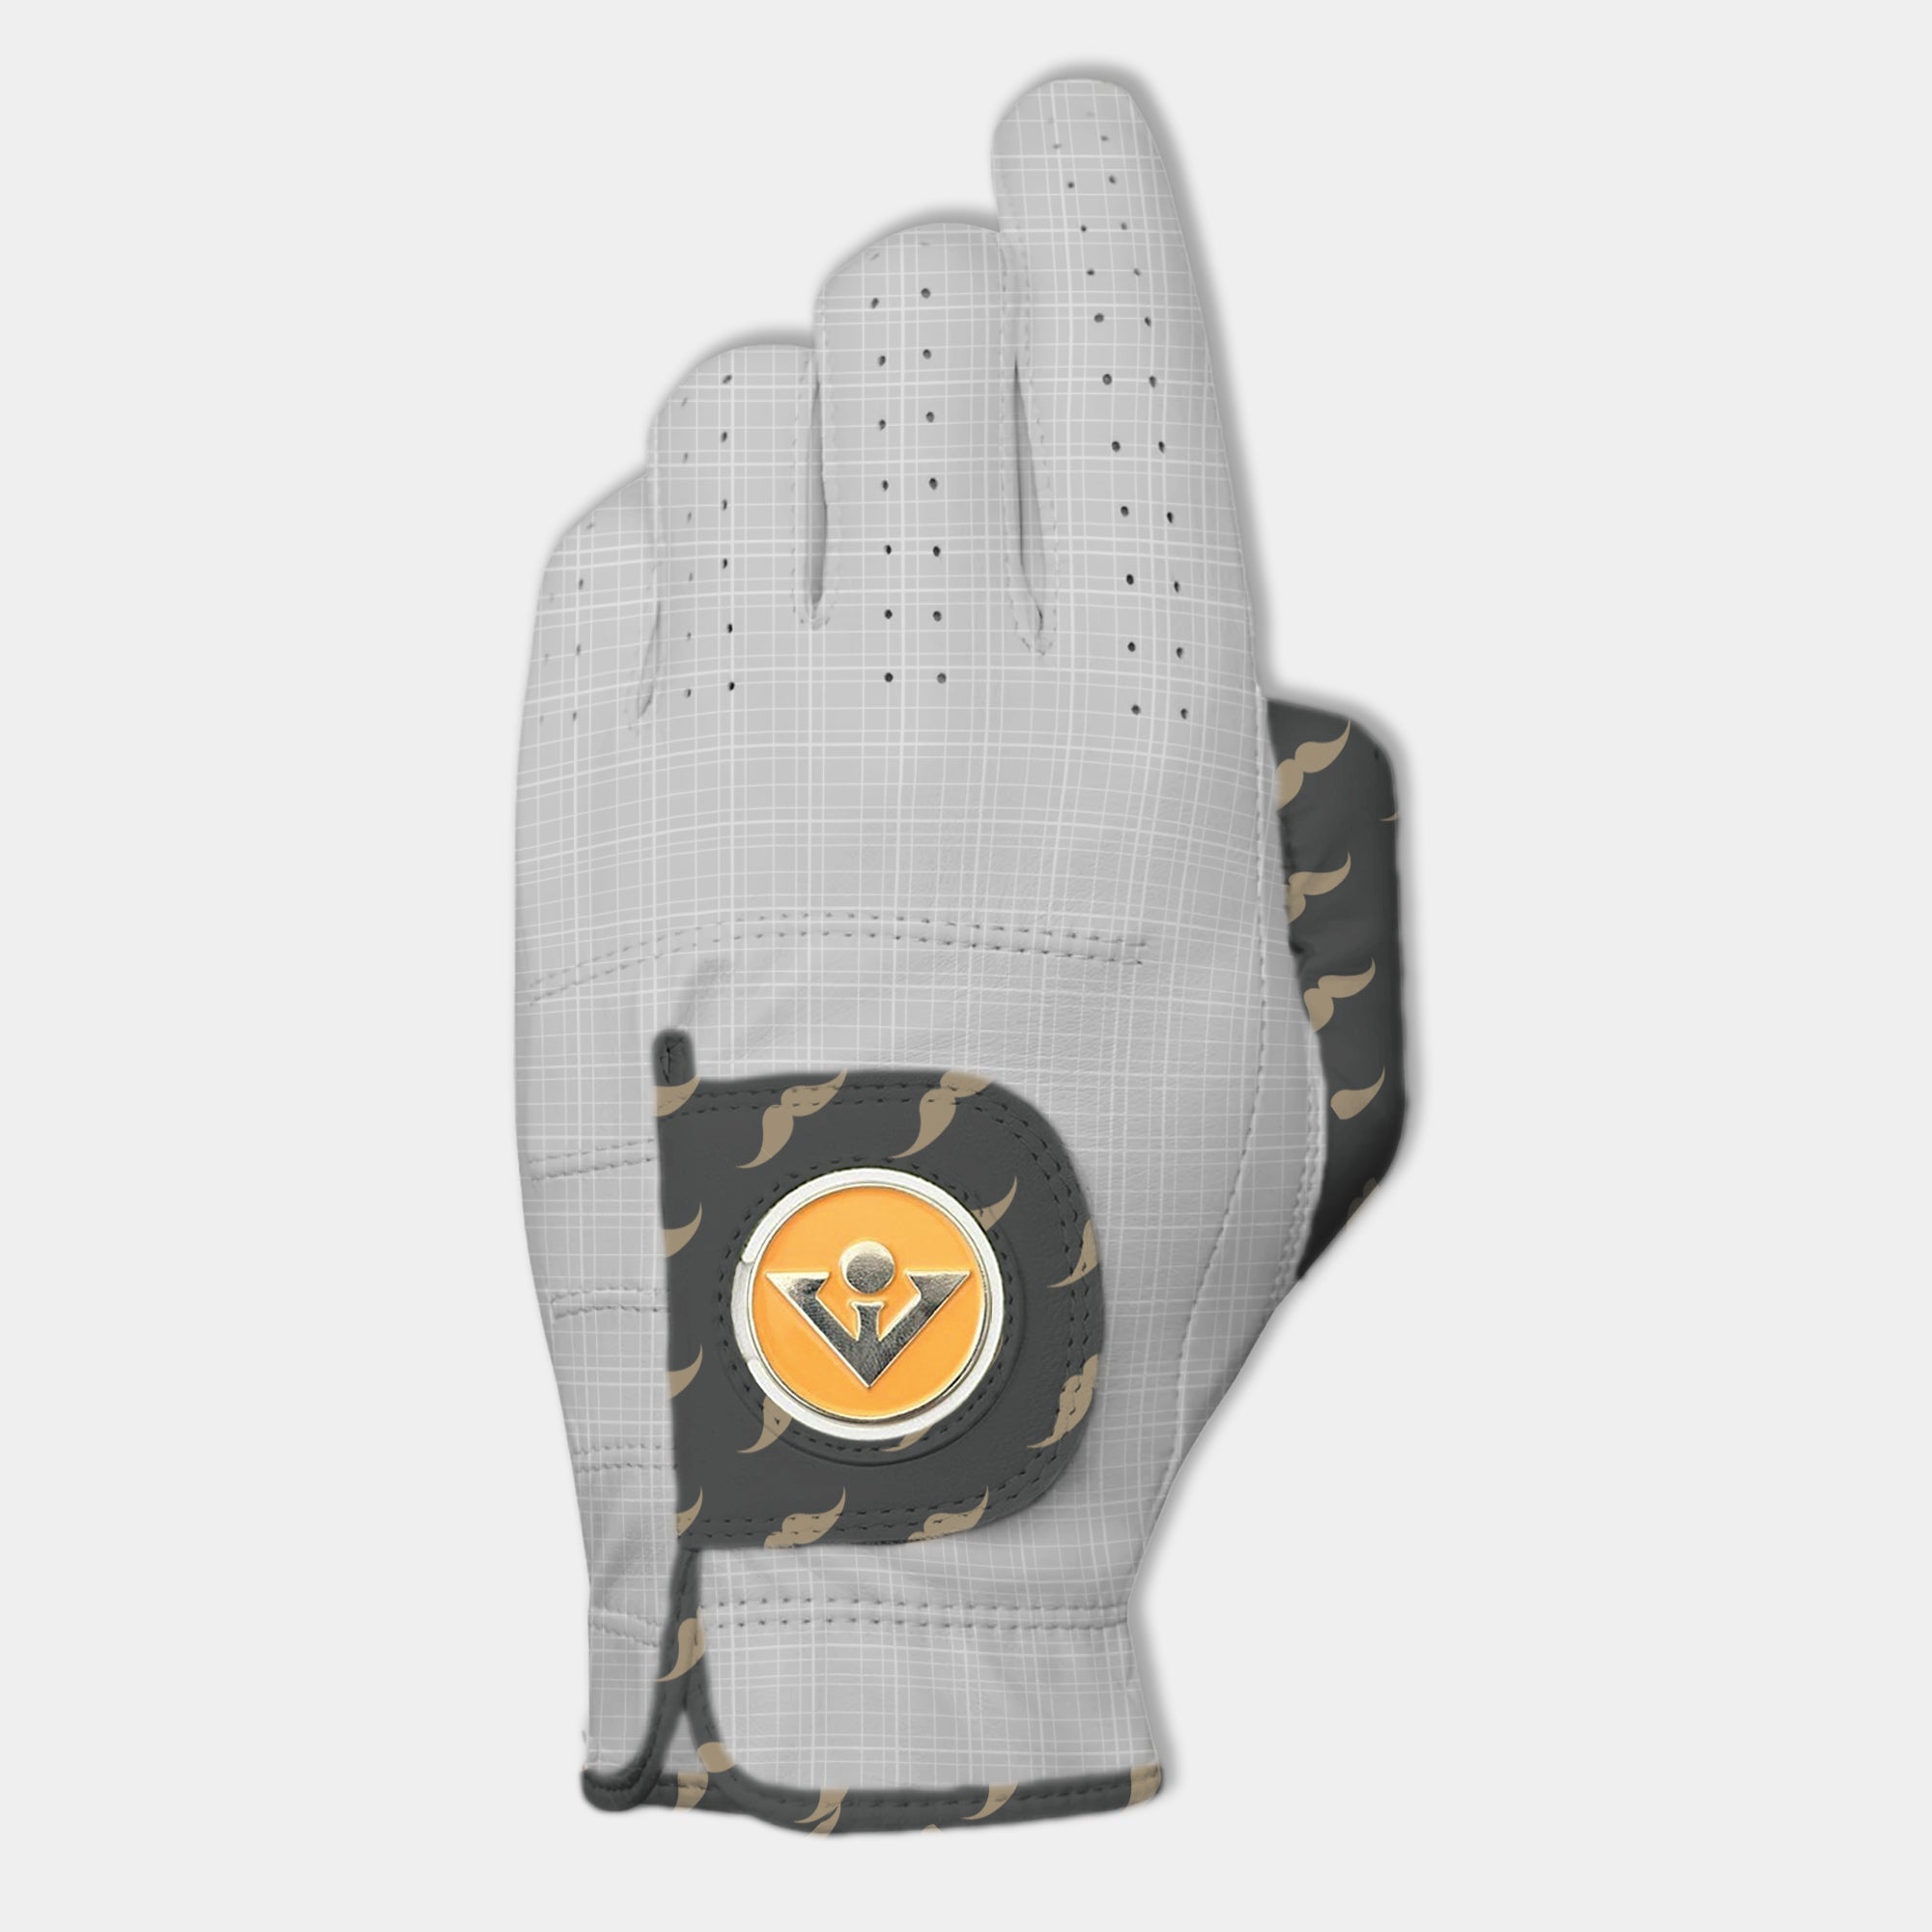 Women's Wooly Burg Golf glove with charcoal and light grey, and mustache plaid pattern, designer golf gloves for women.